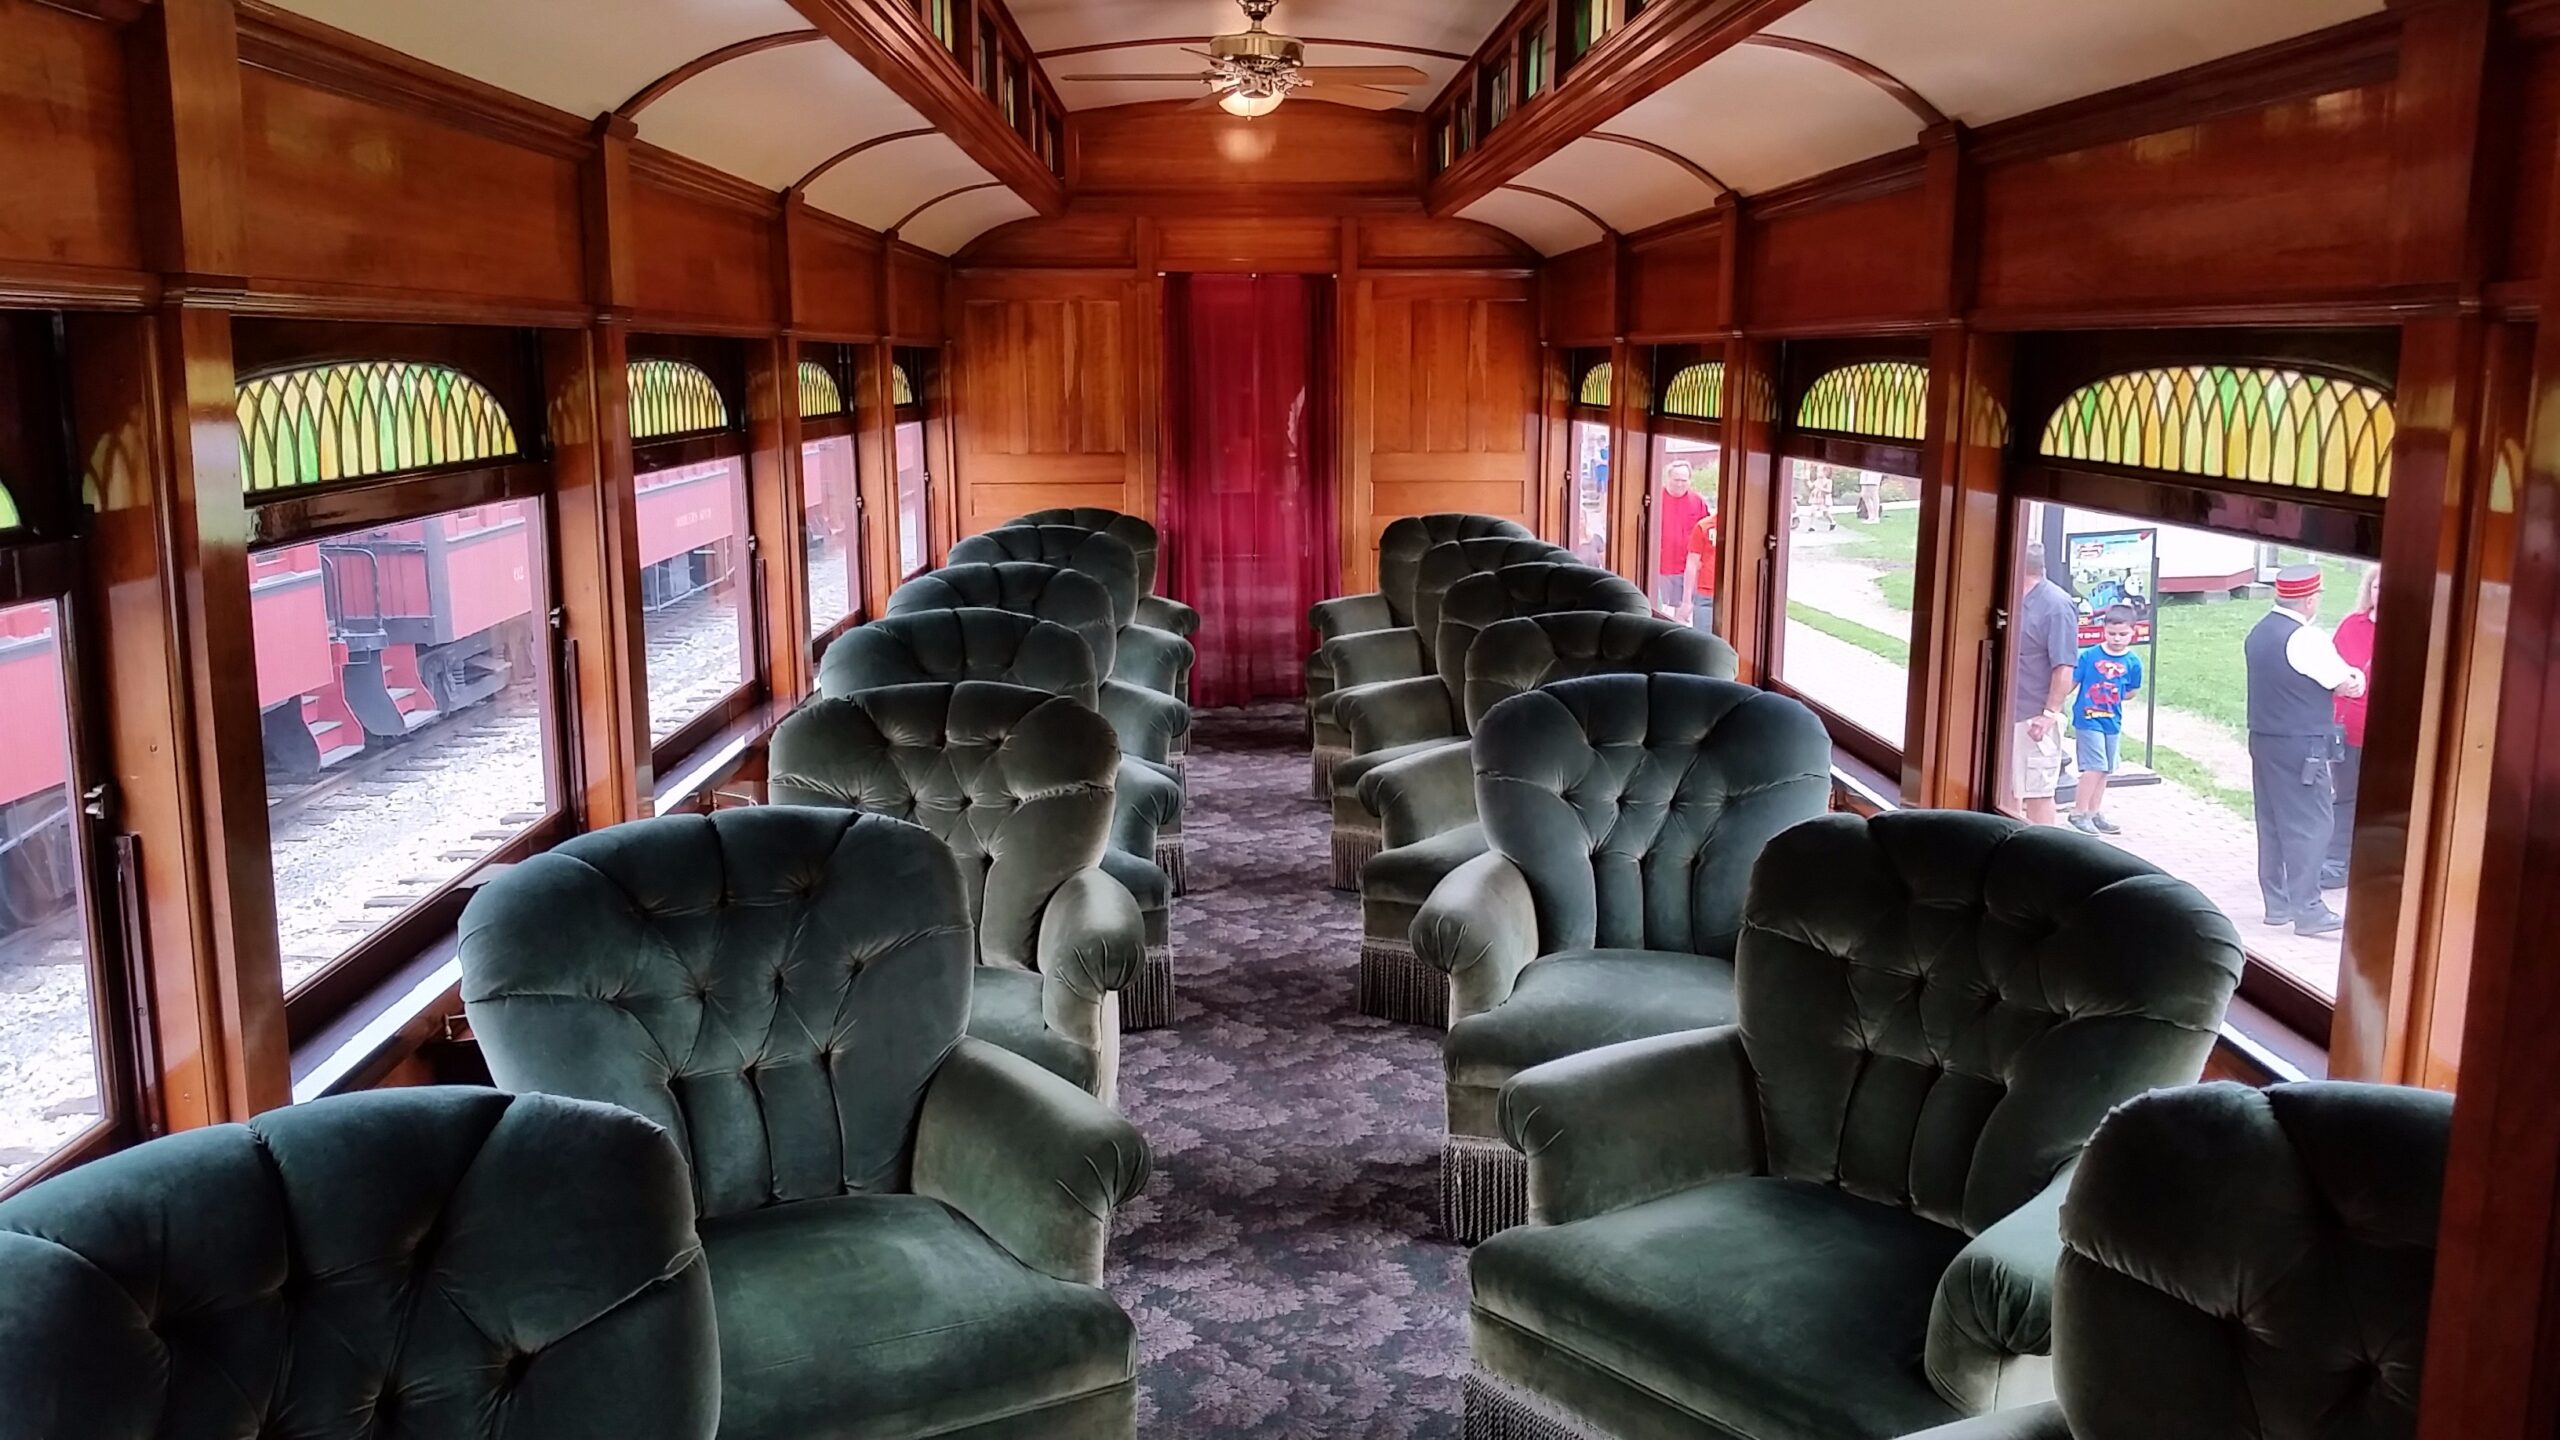 Strasburg Rail Road Image of Henry K. Long First Class Parlor Car